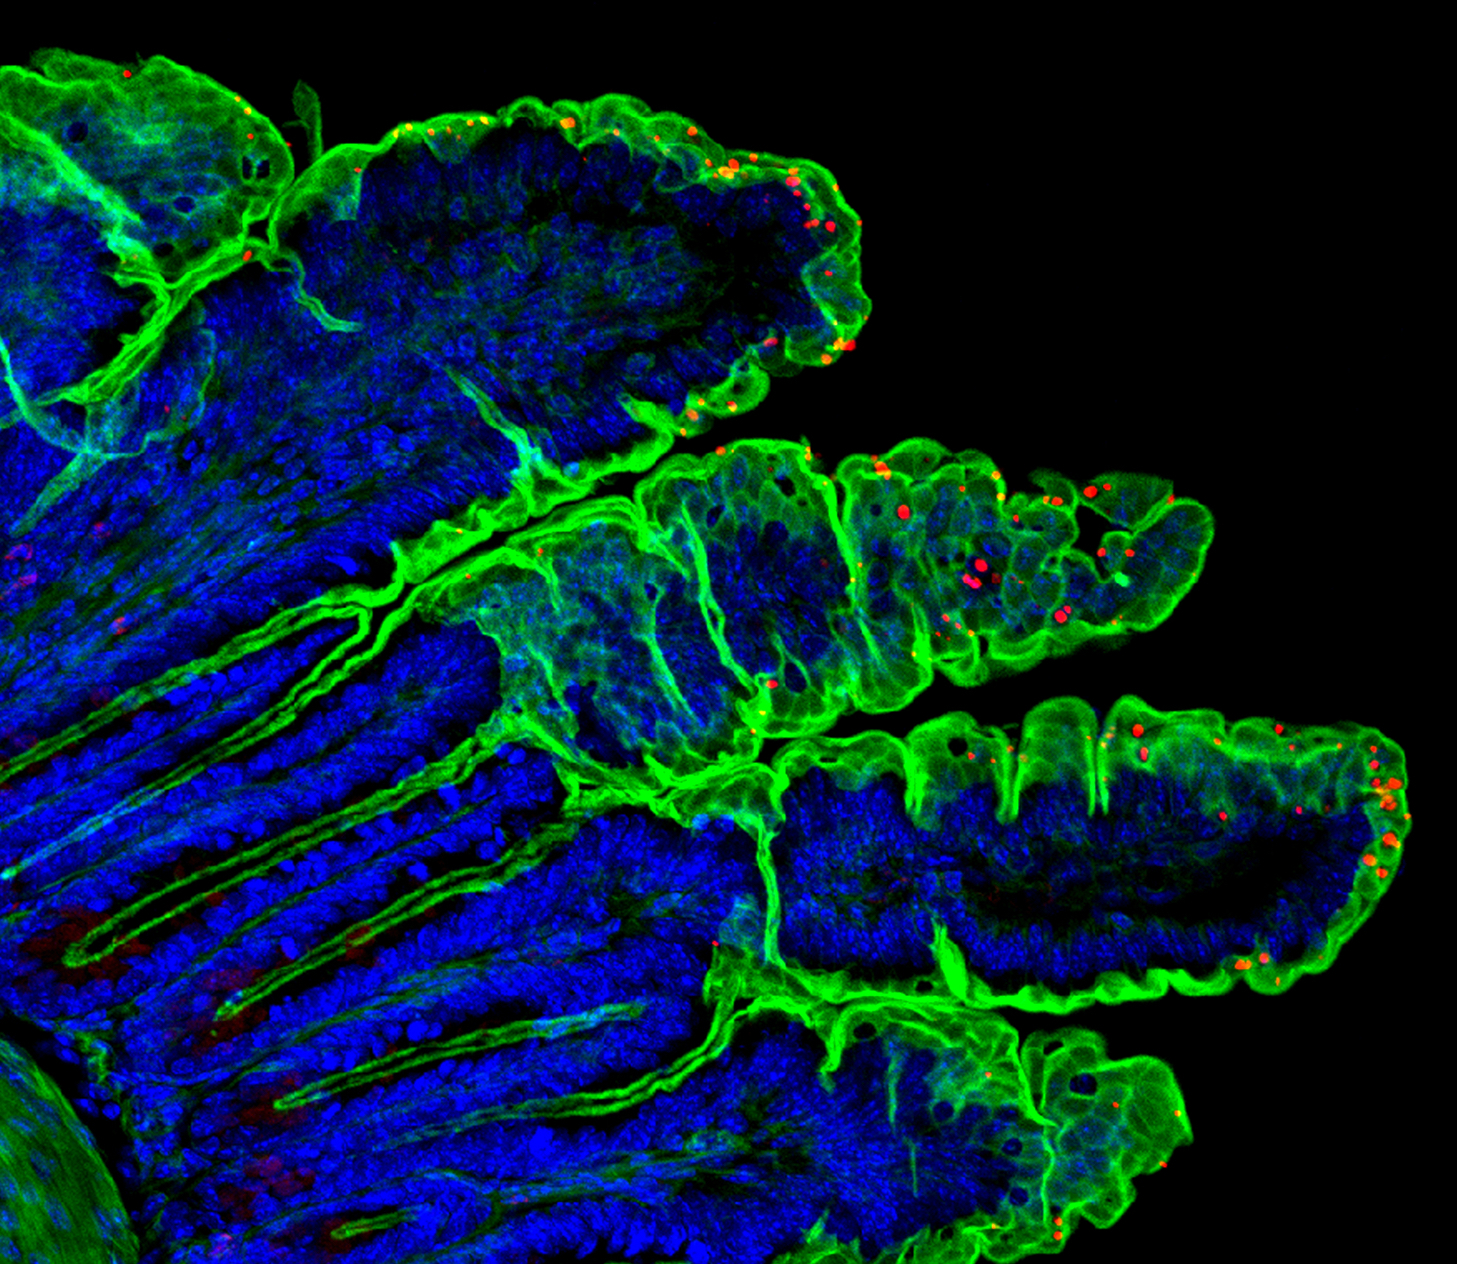 Fluorescent microscopic images shows a section of intestine with blue, green, and red labels.